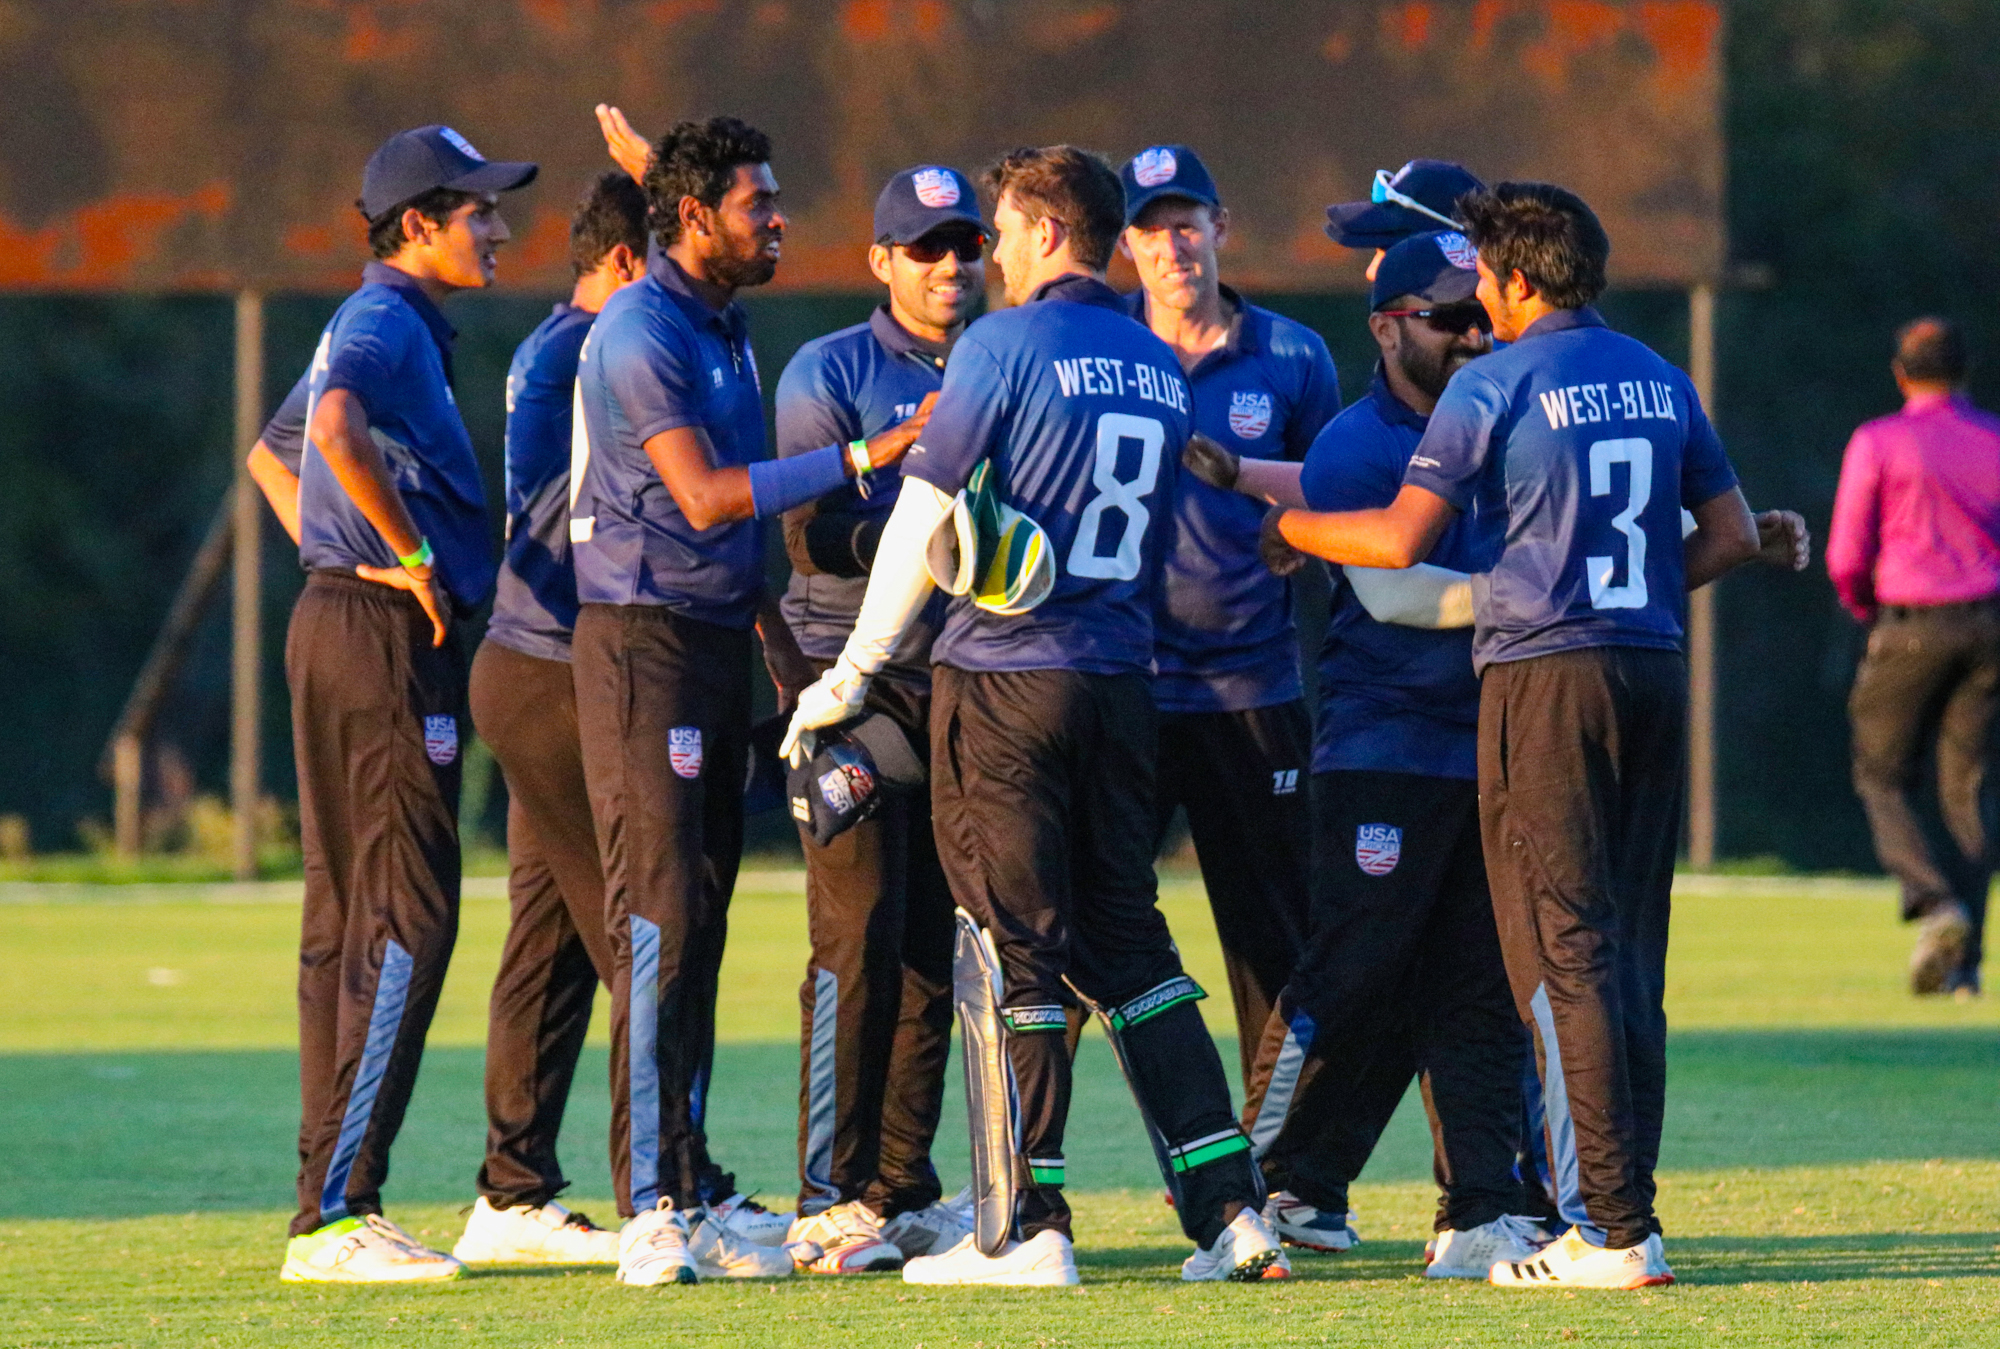 SCHEDULE, SQUADS AND TEAM MANAGEMENT FOR MEN’S T20 NATIONAL CHAMPIONSHIP ANNOUNCED